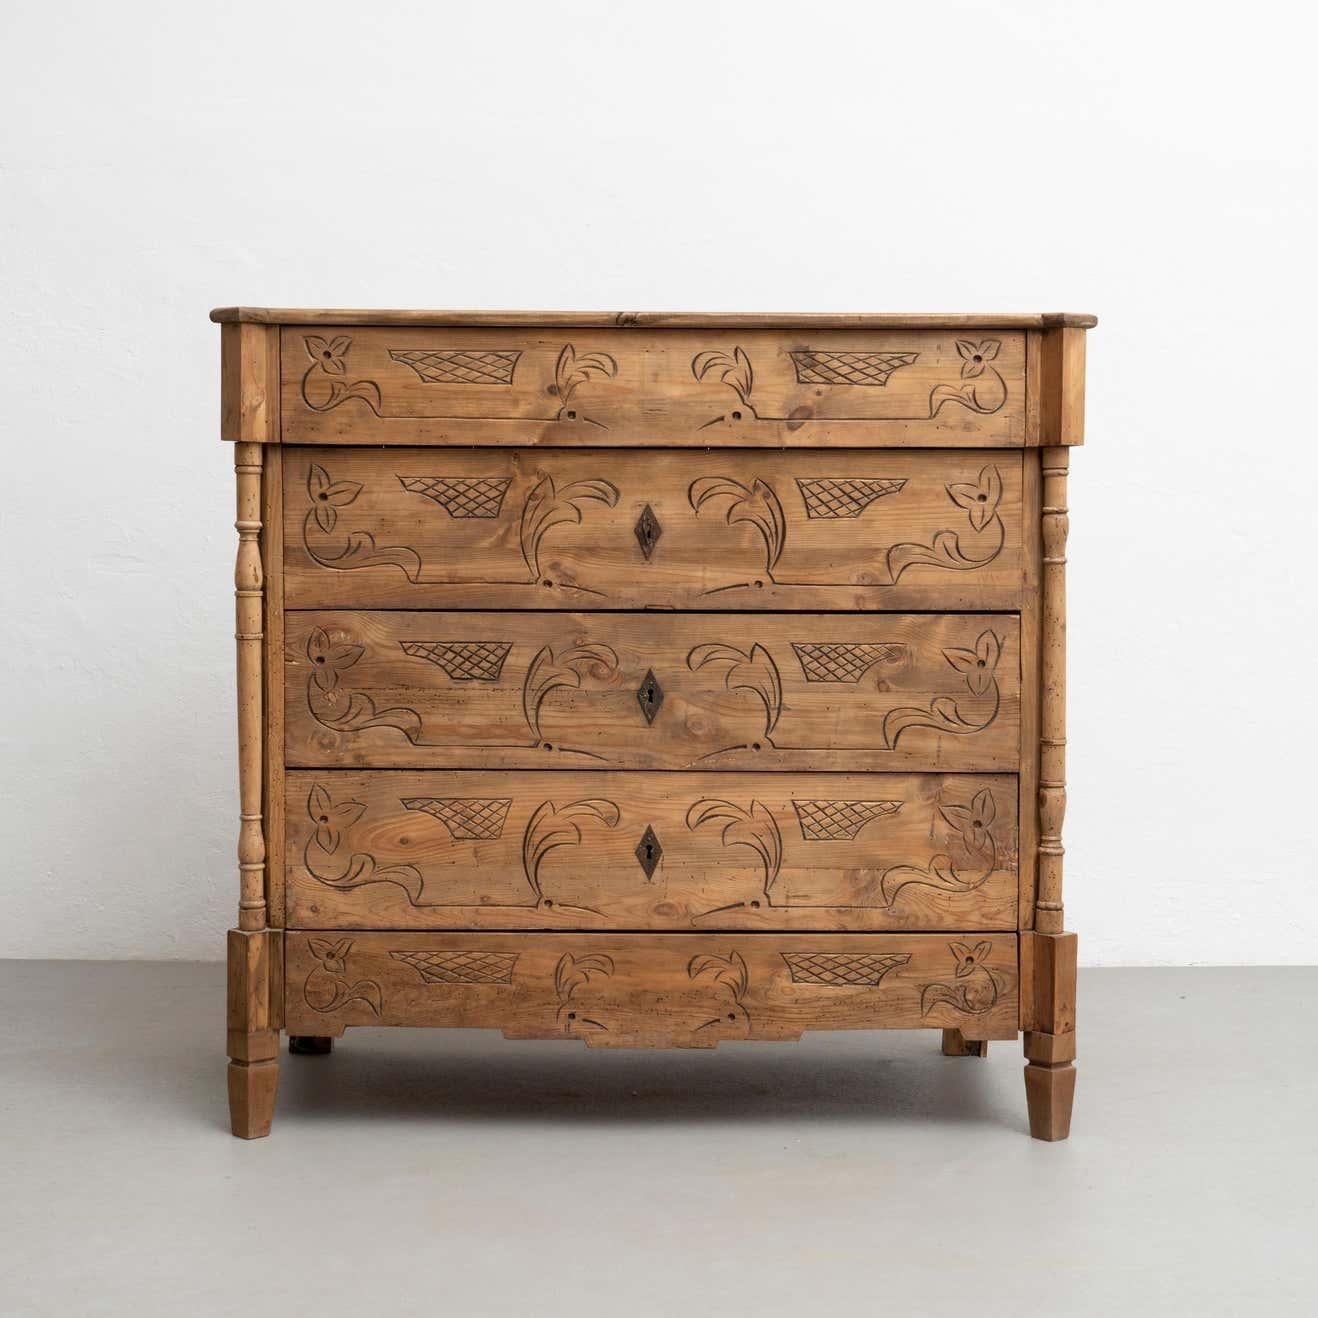 This early 20th-century Spanish pine wood dresser exudes timeless elegance and rustic charm. Crafted from high-quality pine wood, this dresser boasts a beautiful natural grain that has been expertly preserved, adding a touch of warmth and character